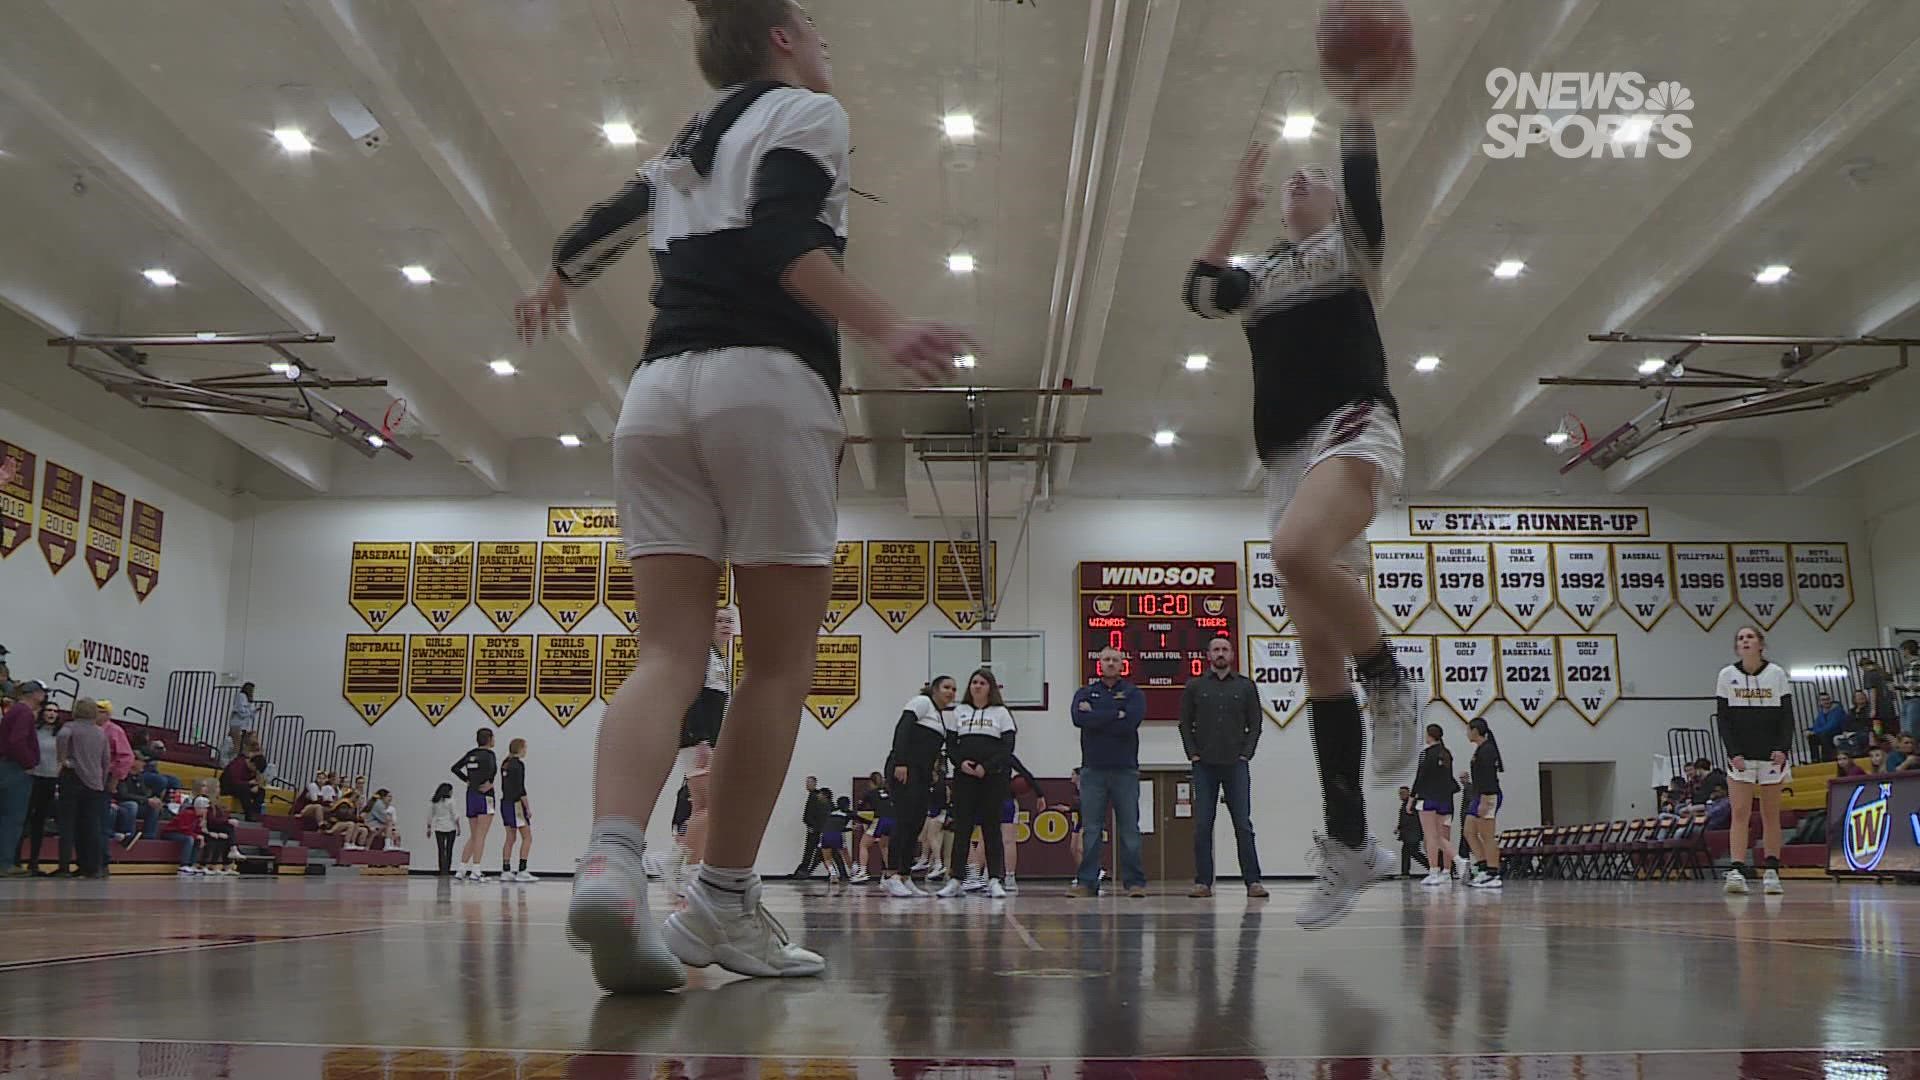 Windsor High School's top-ranked girls basketball team is still undefeated with a win over fifth-ranked Holy Family High School.